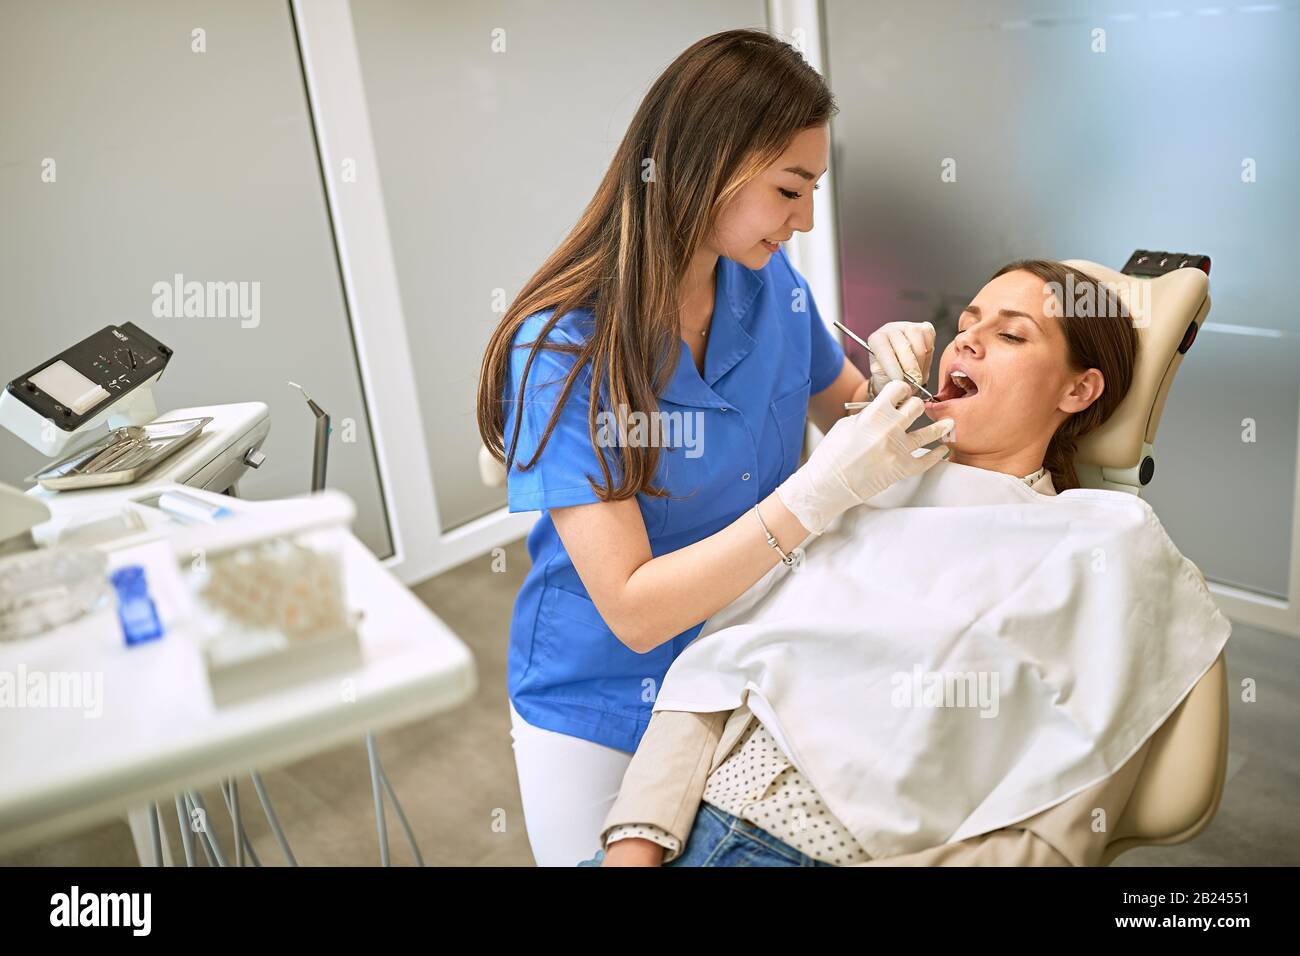 Young female in dental chair repairing tooth Stock Photo